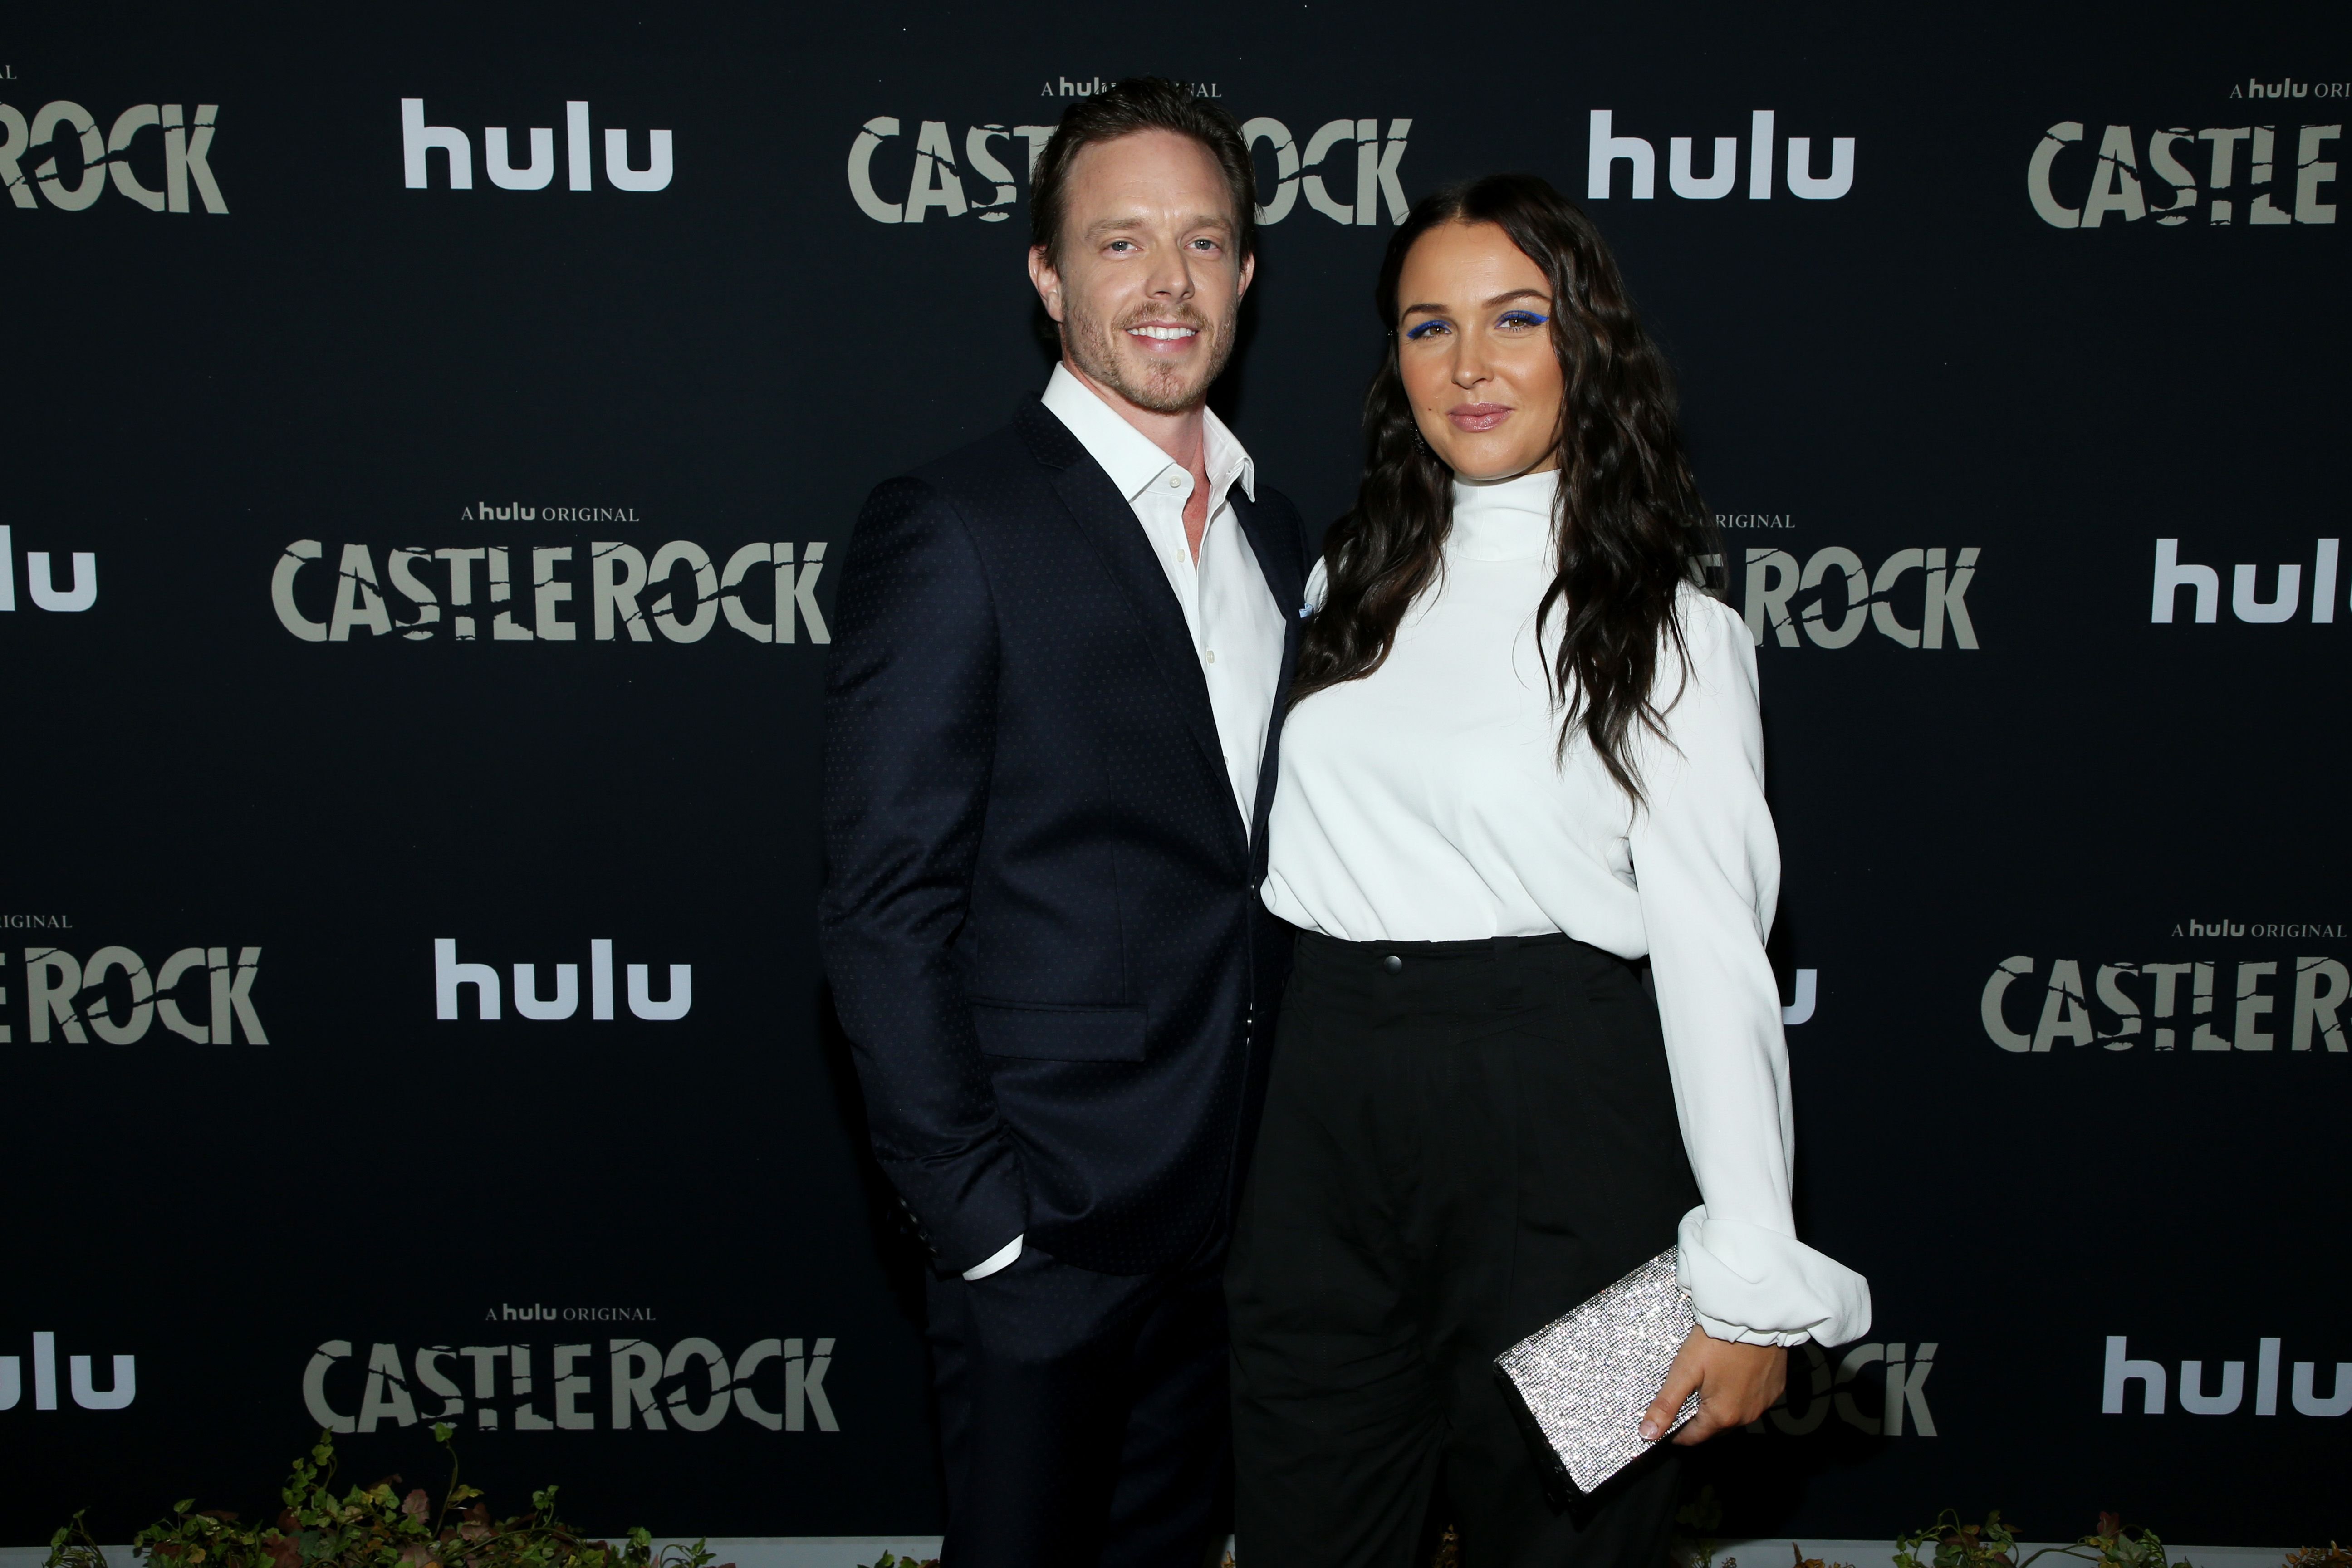 Matthew Alan and Camilla Luddington at the premiere of Hulu's "Castle Rock" Season 2 at AMC Sunset 5 on October 14, 2019 in Los Angeles, California | Photo: Getty Images